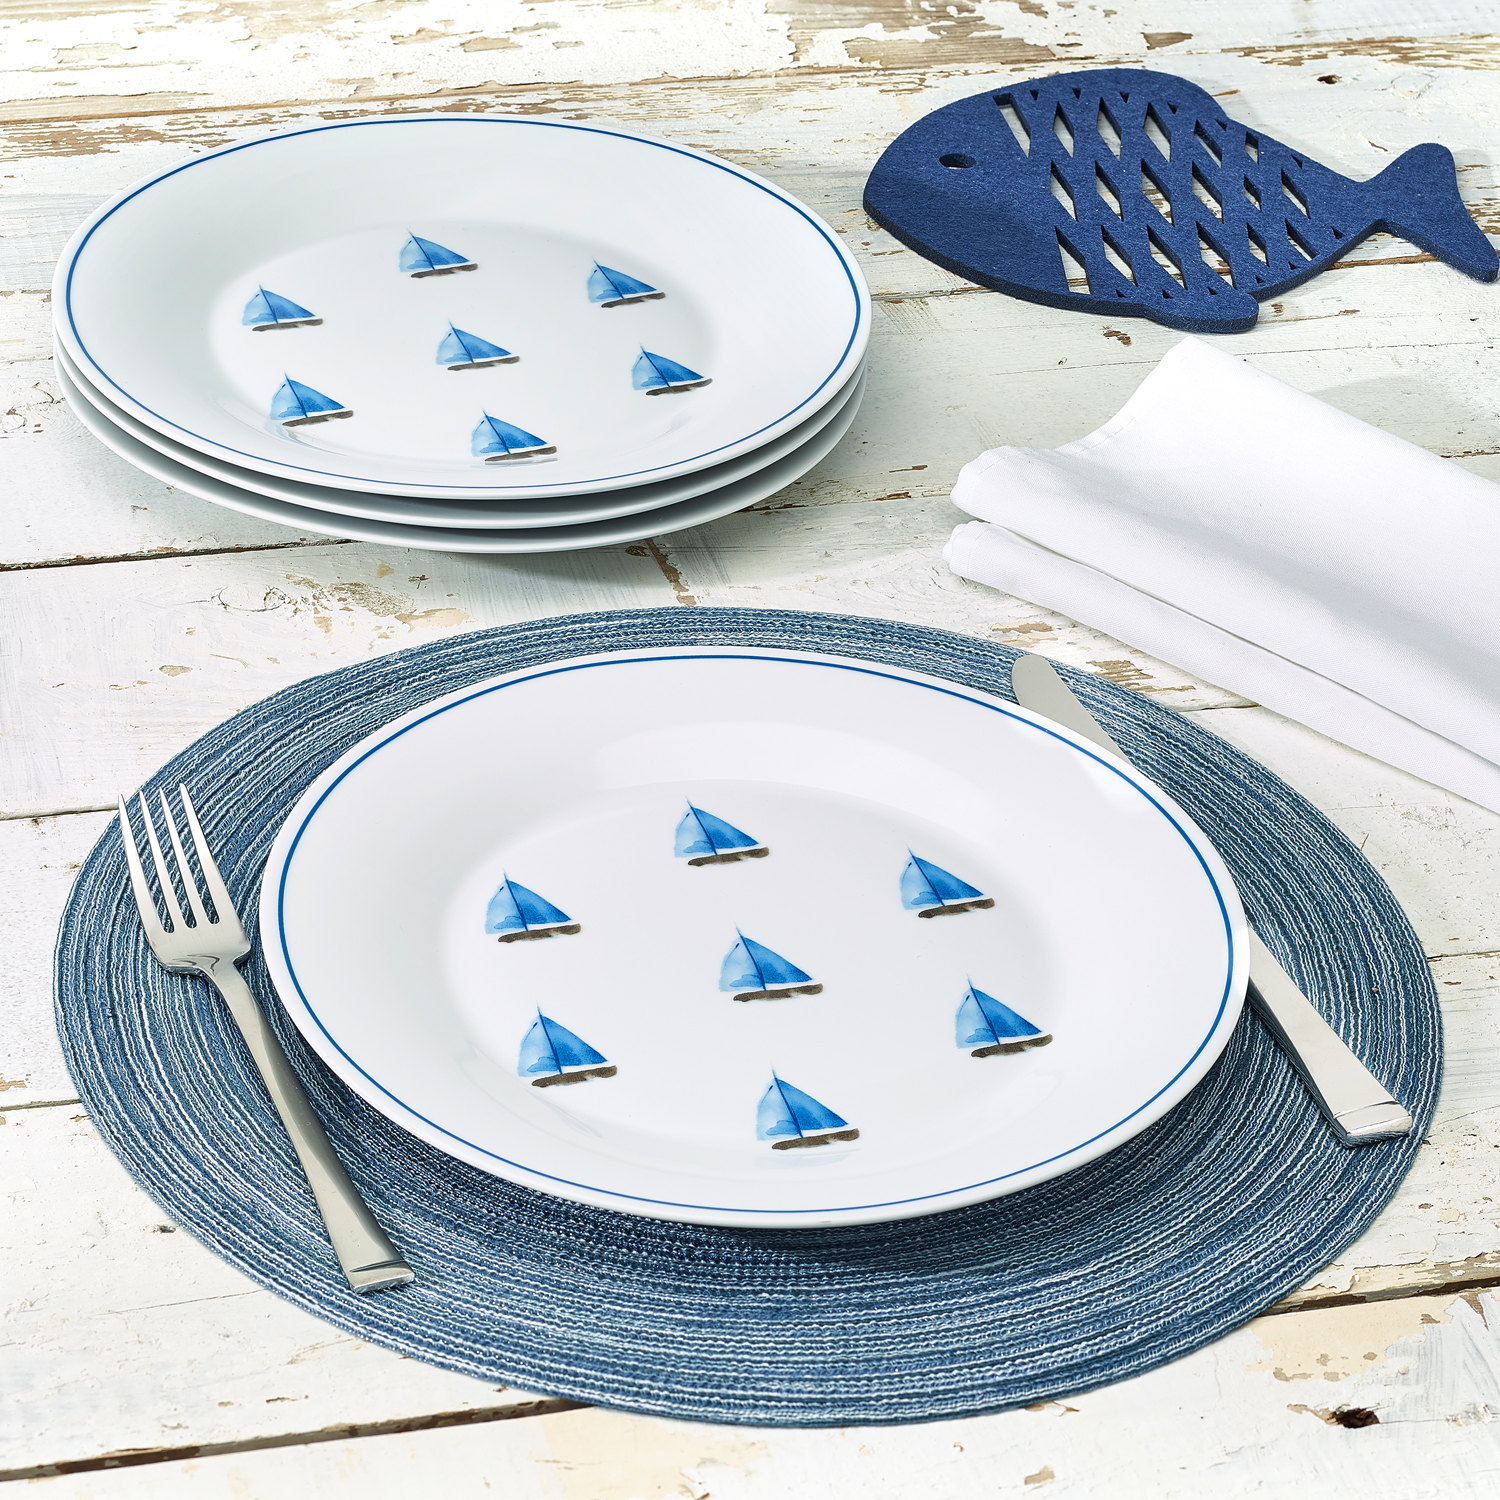 Sail Boat Watercolor Collection 10.5" Porcelain Set of 4 Dinner Plates, Walmart Exclusive - image 1 of 3